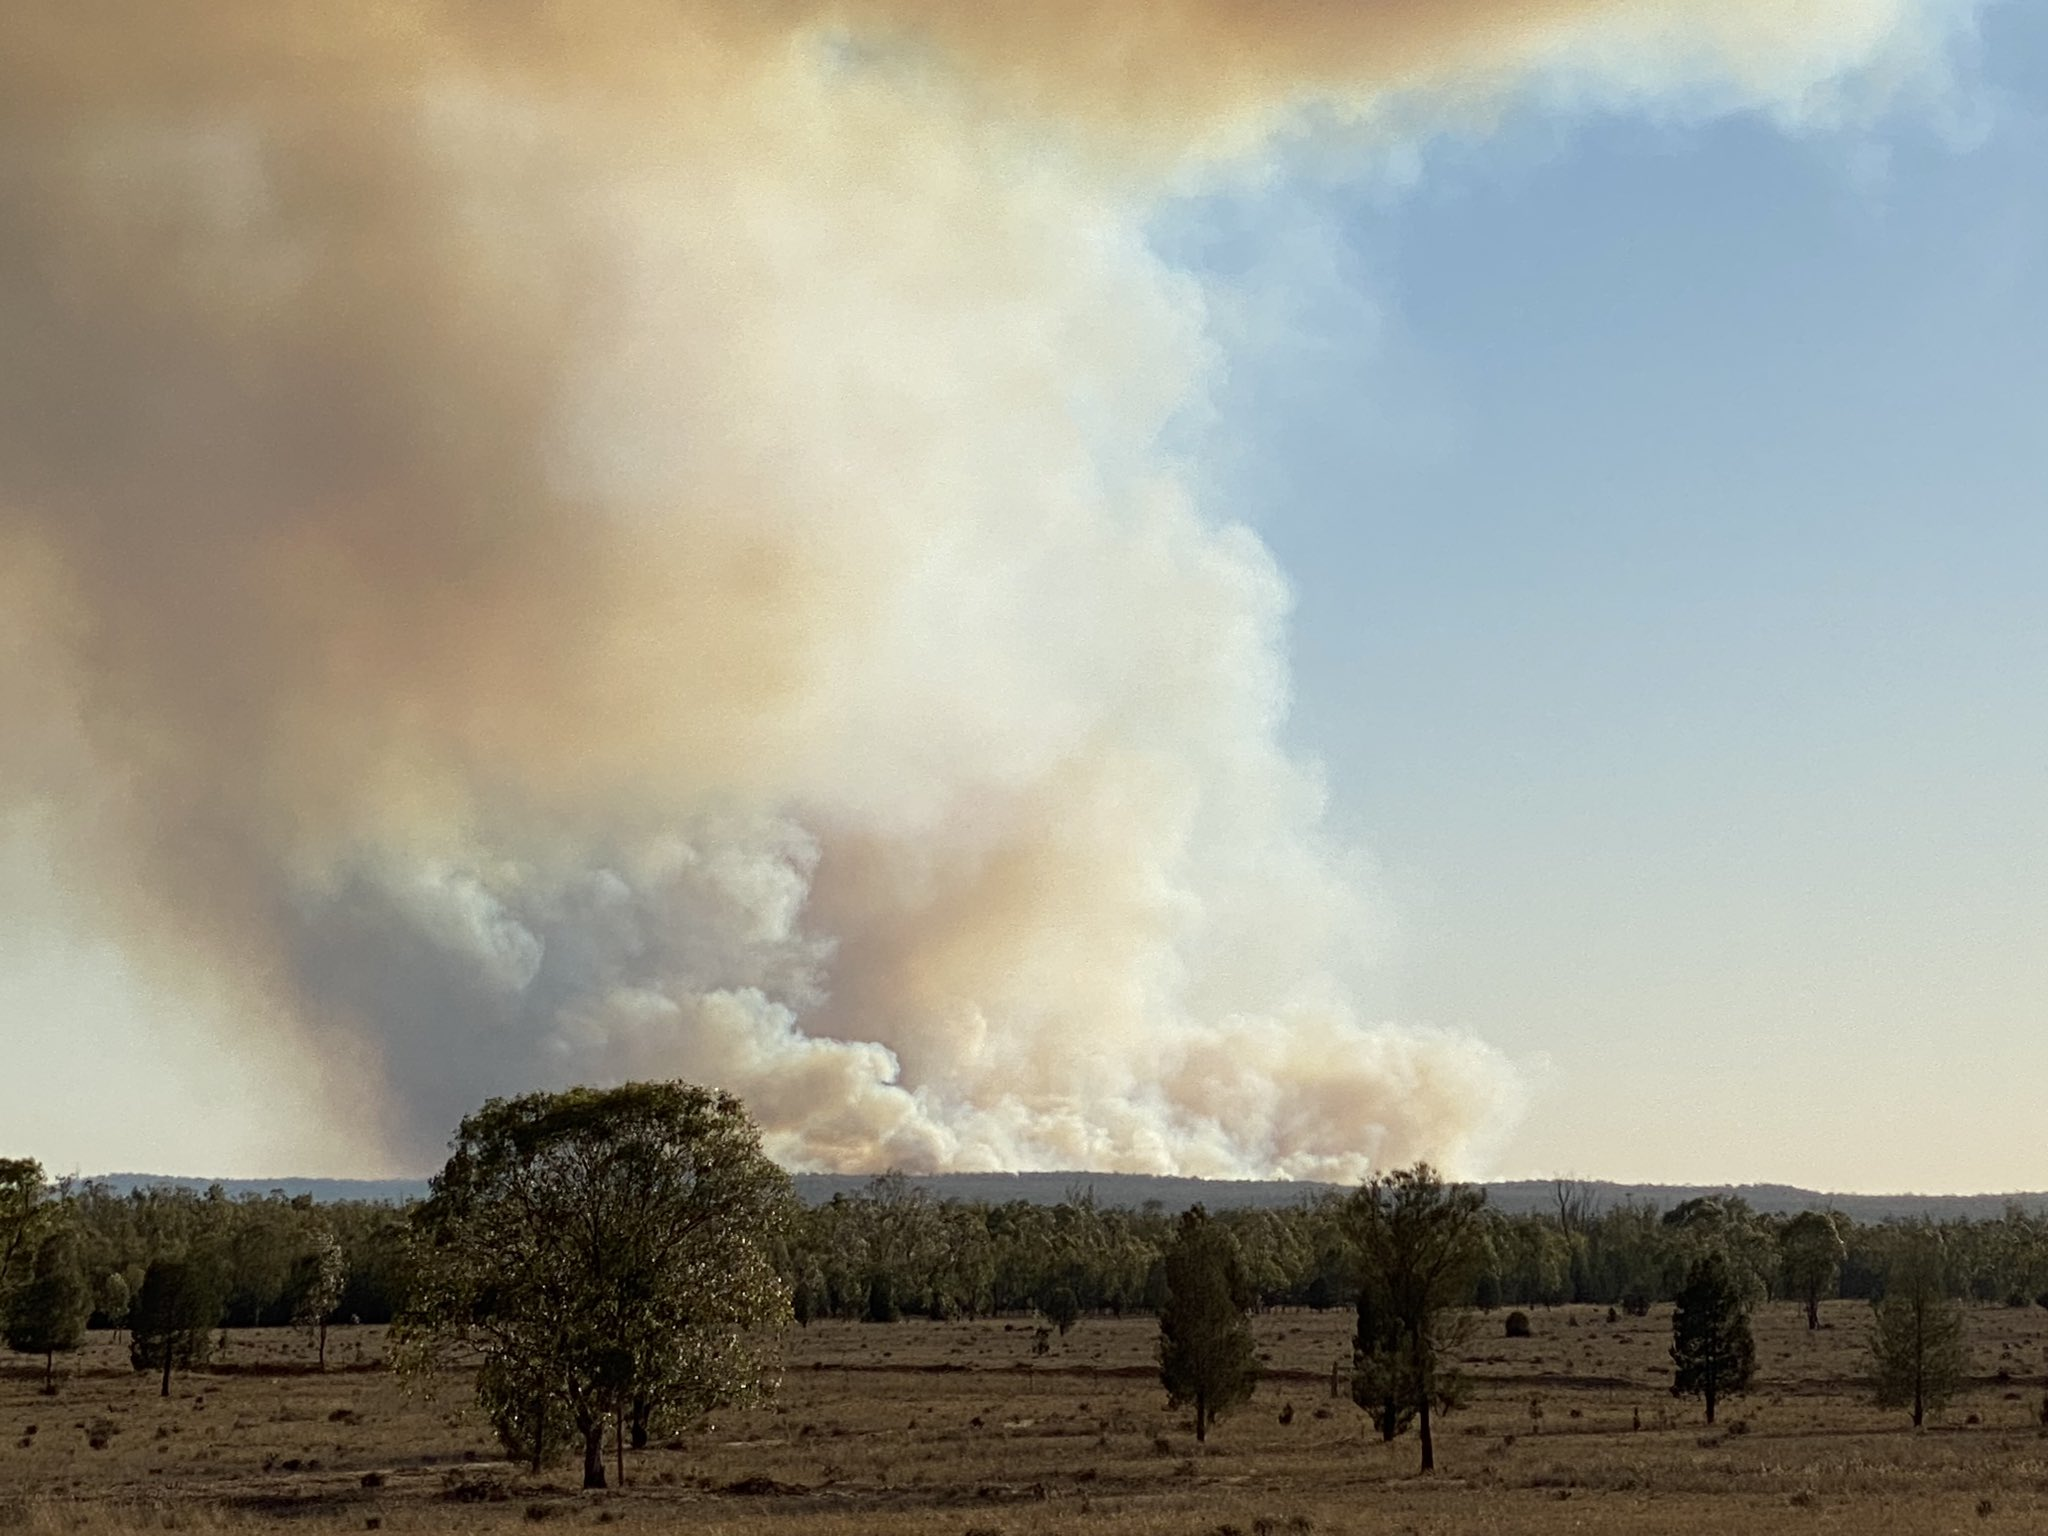 Millmerran fire still forcing evacuations as severe fire danger continues